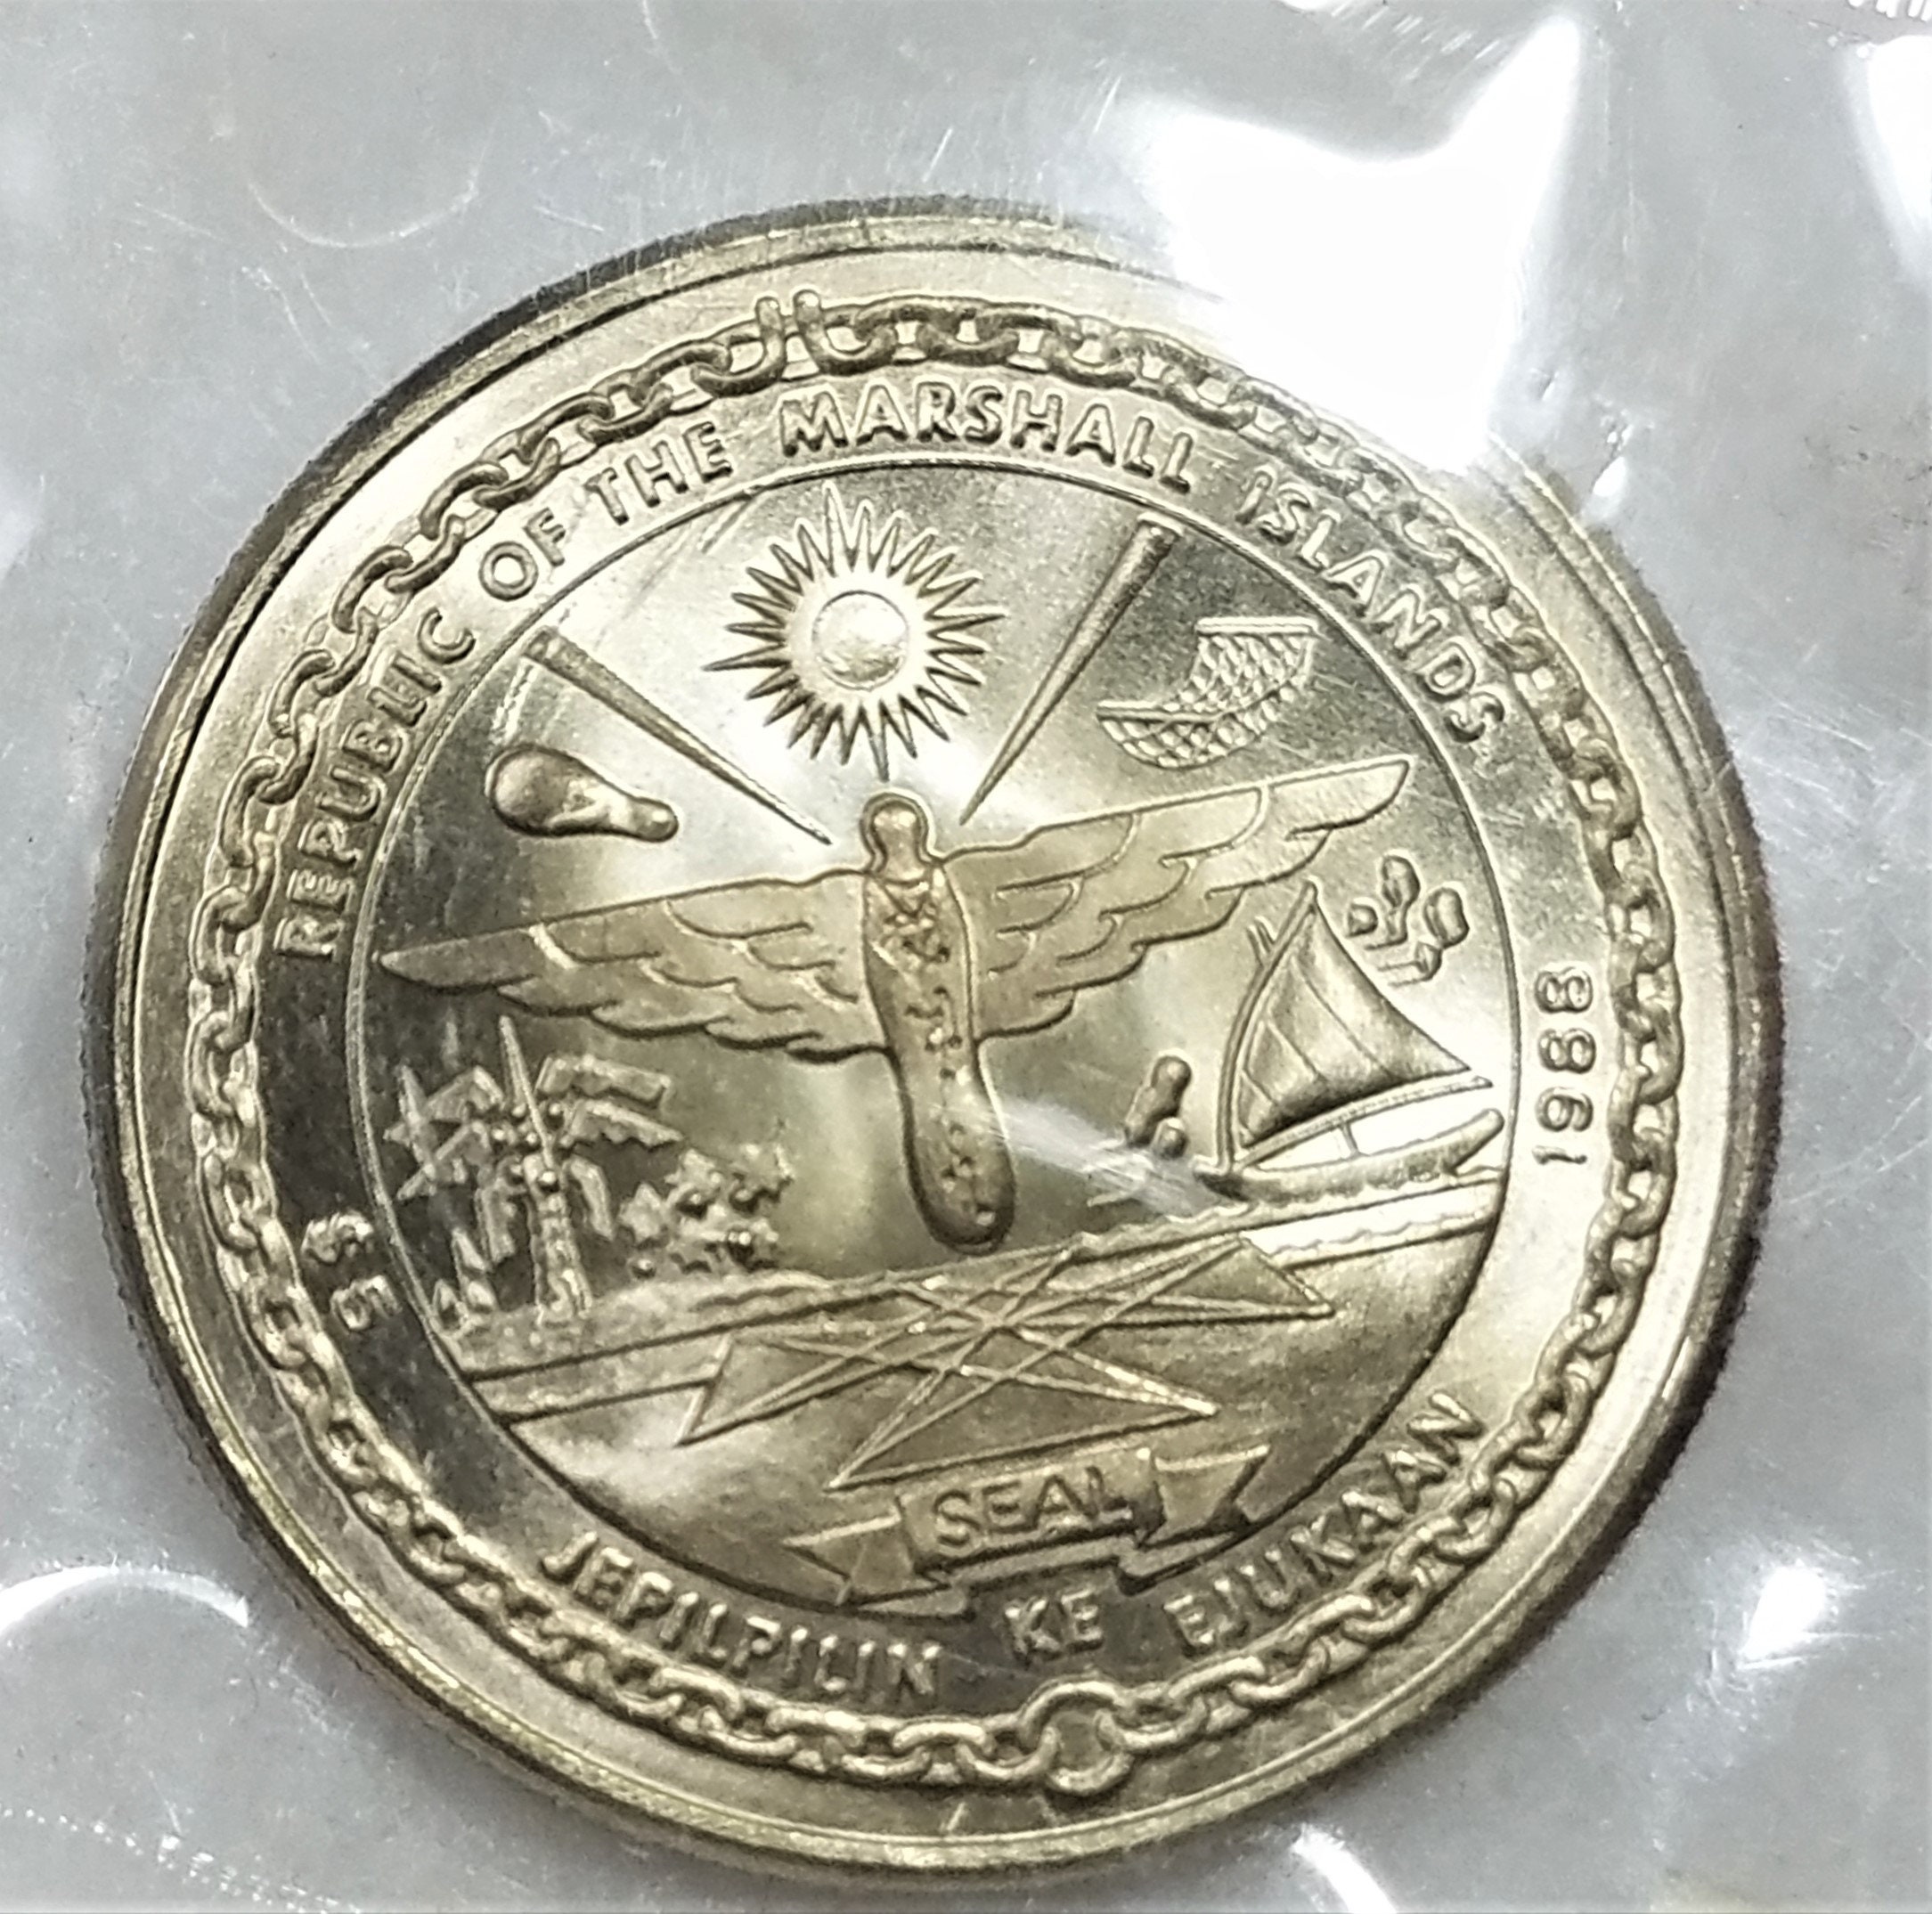 Marshall Islands rare coins for collectors and other buyers ~ MegaMinistore